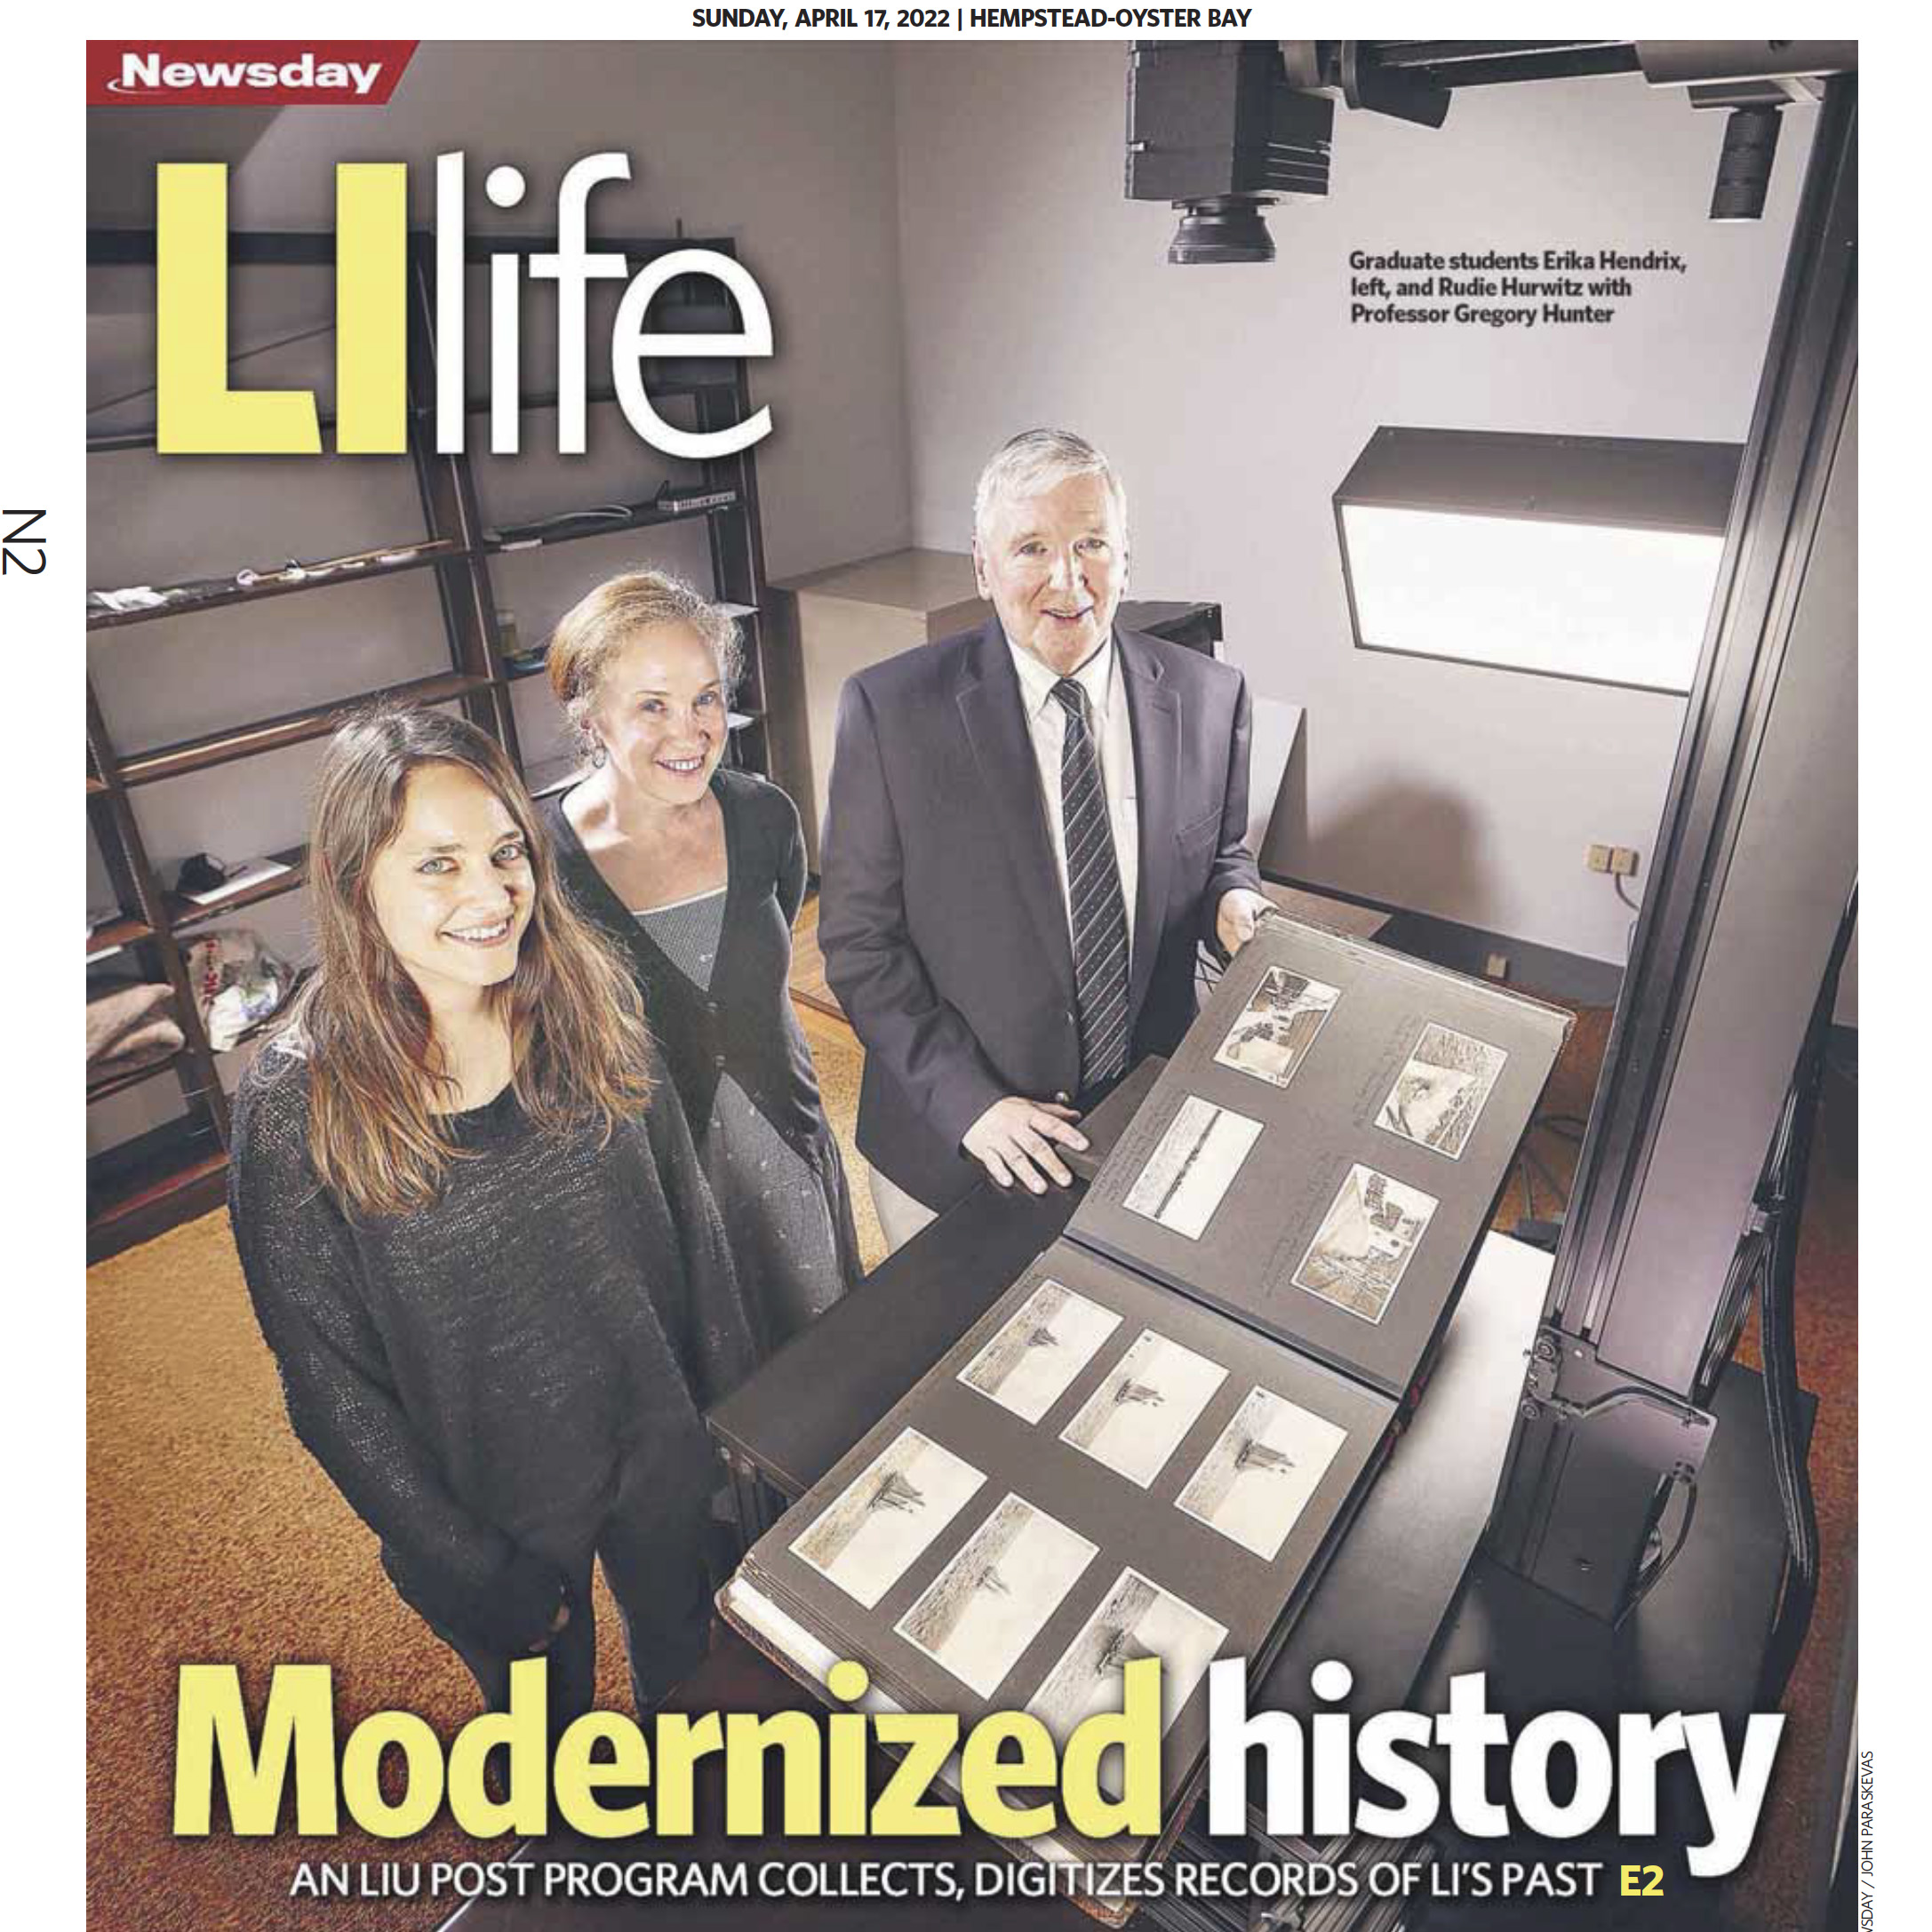 NEWSDAY COVERAGE: LIU Post is Using a $1.5M Grant from the Robert David Lion Gardiner Foundation to Preserve LI History for the Digital Age